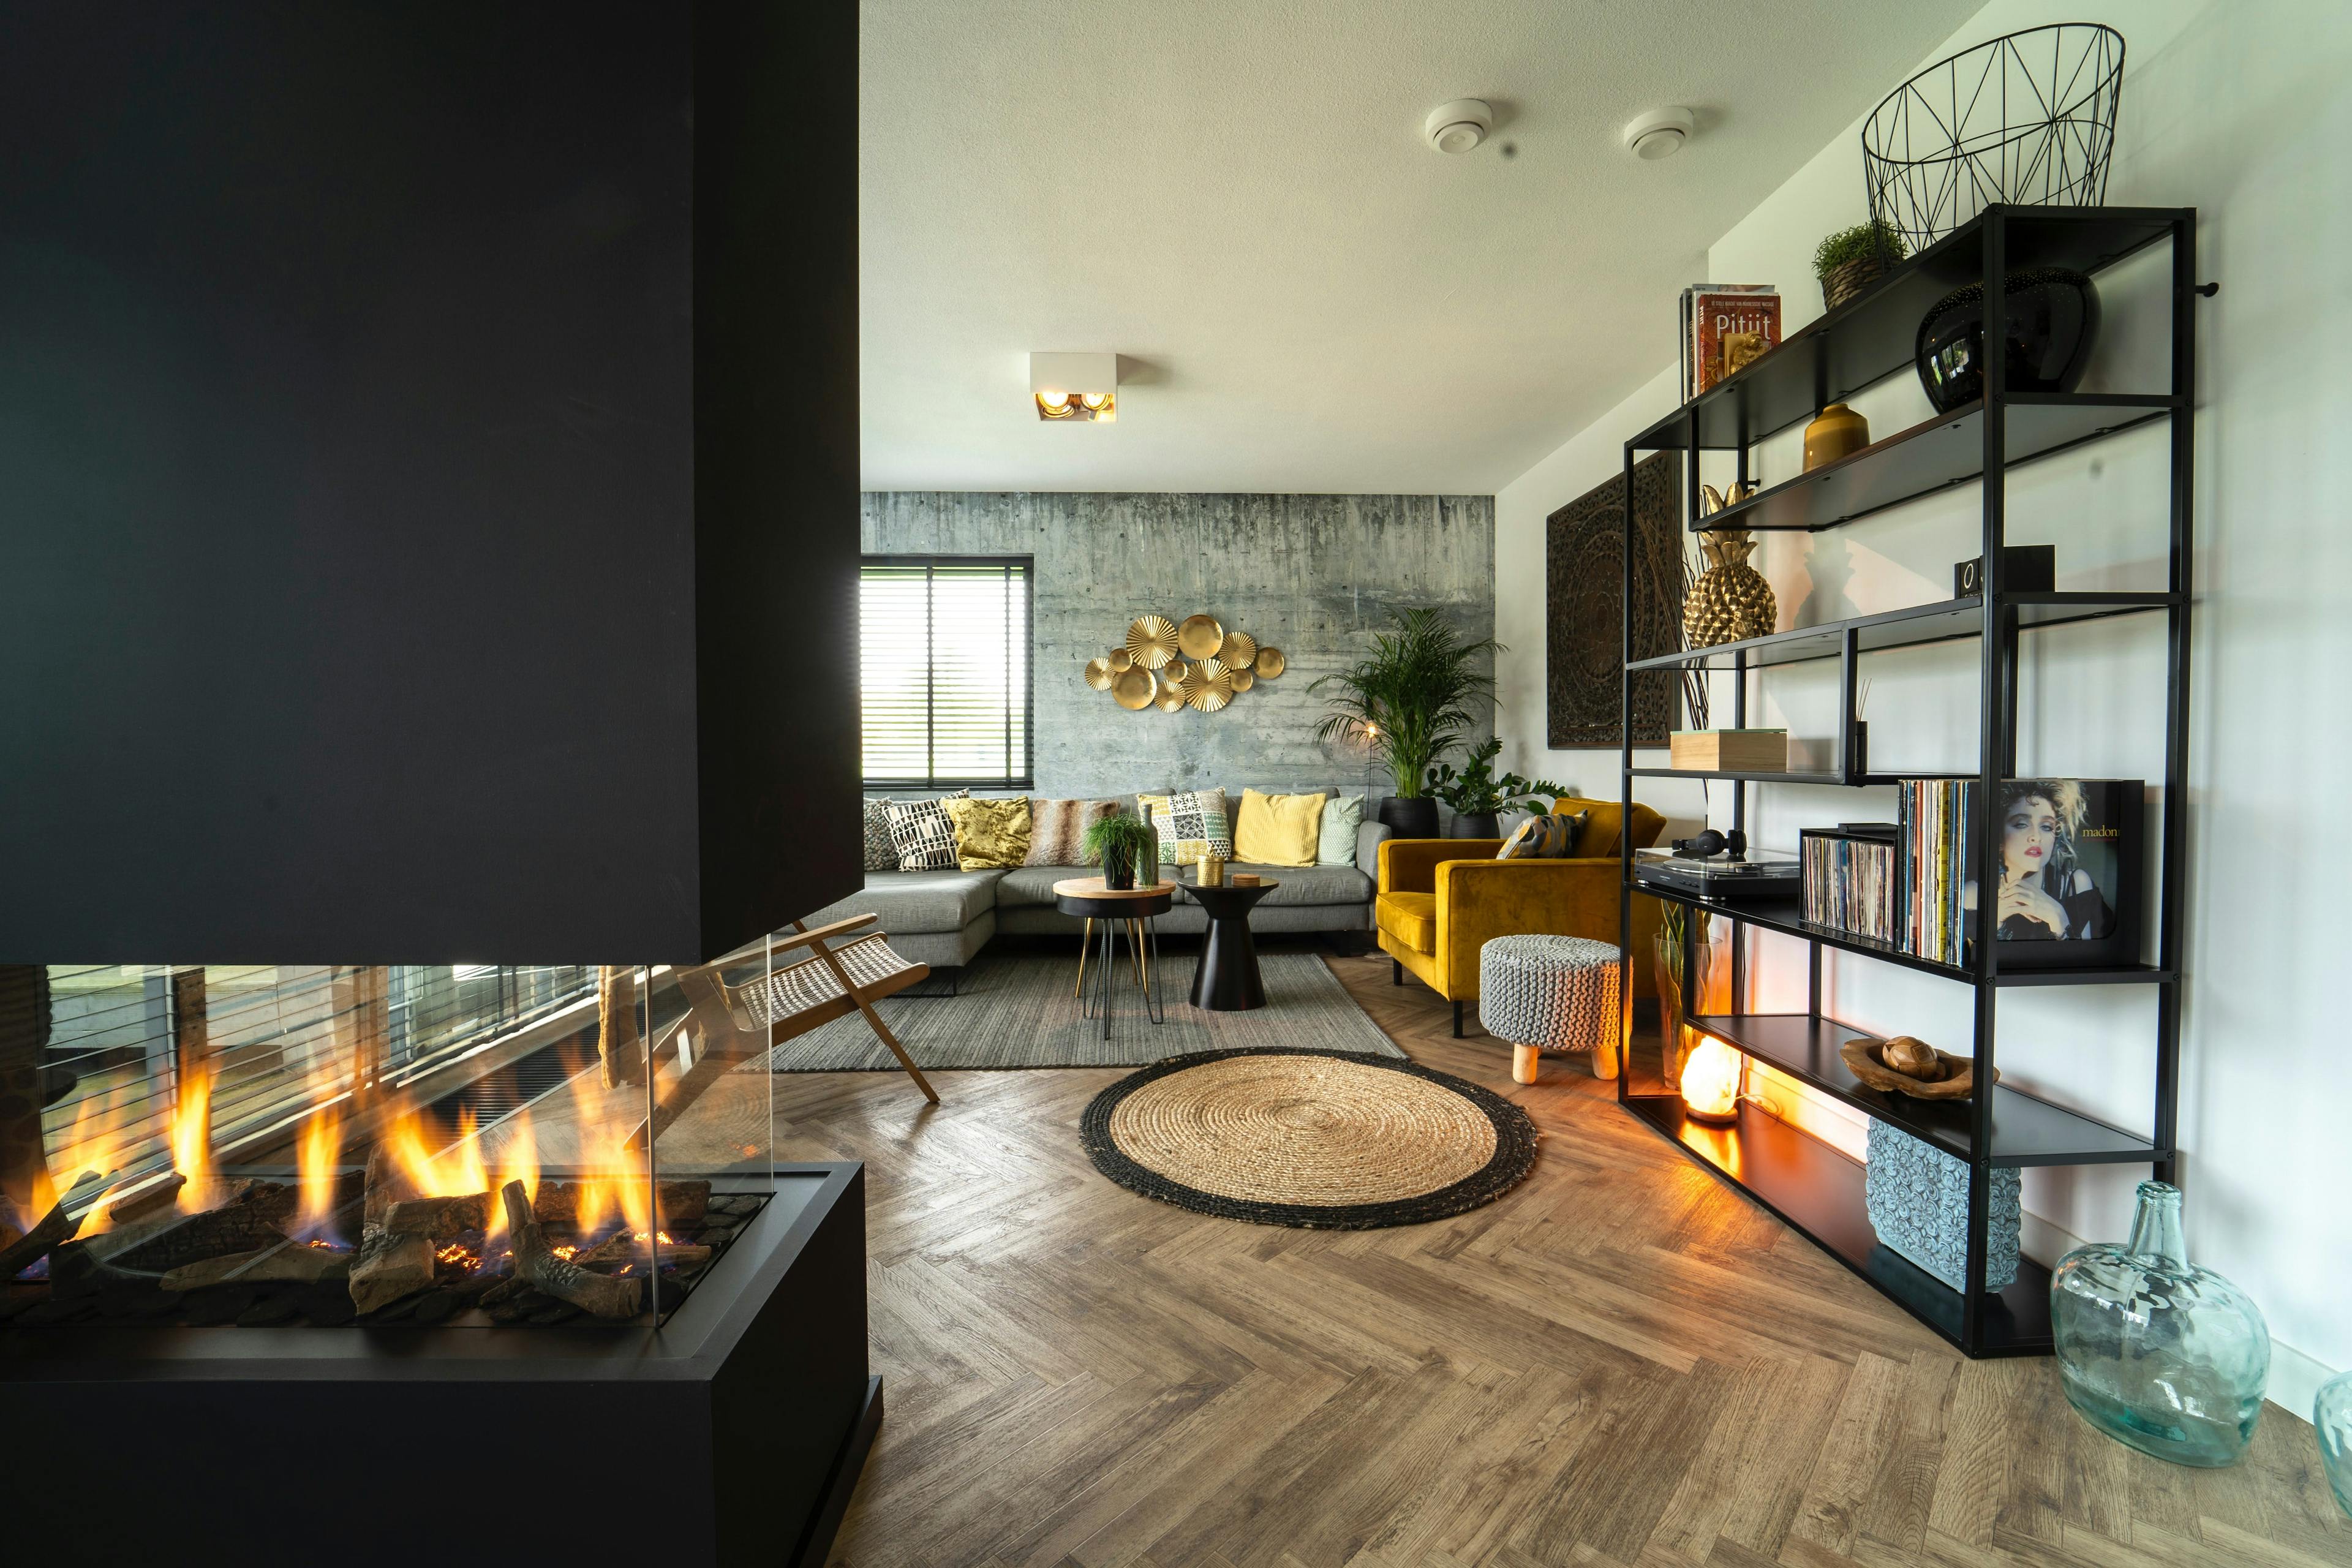 Home interior with wooden floors and fireplace